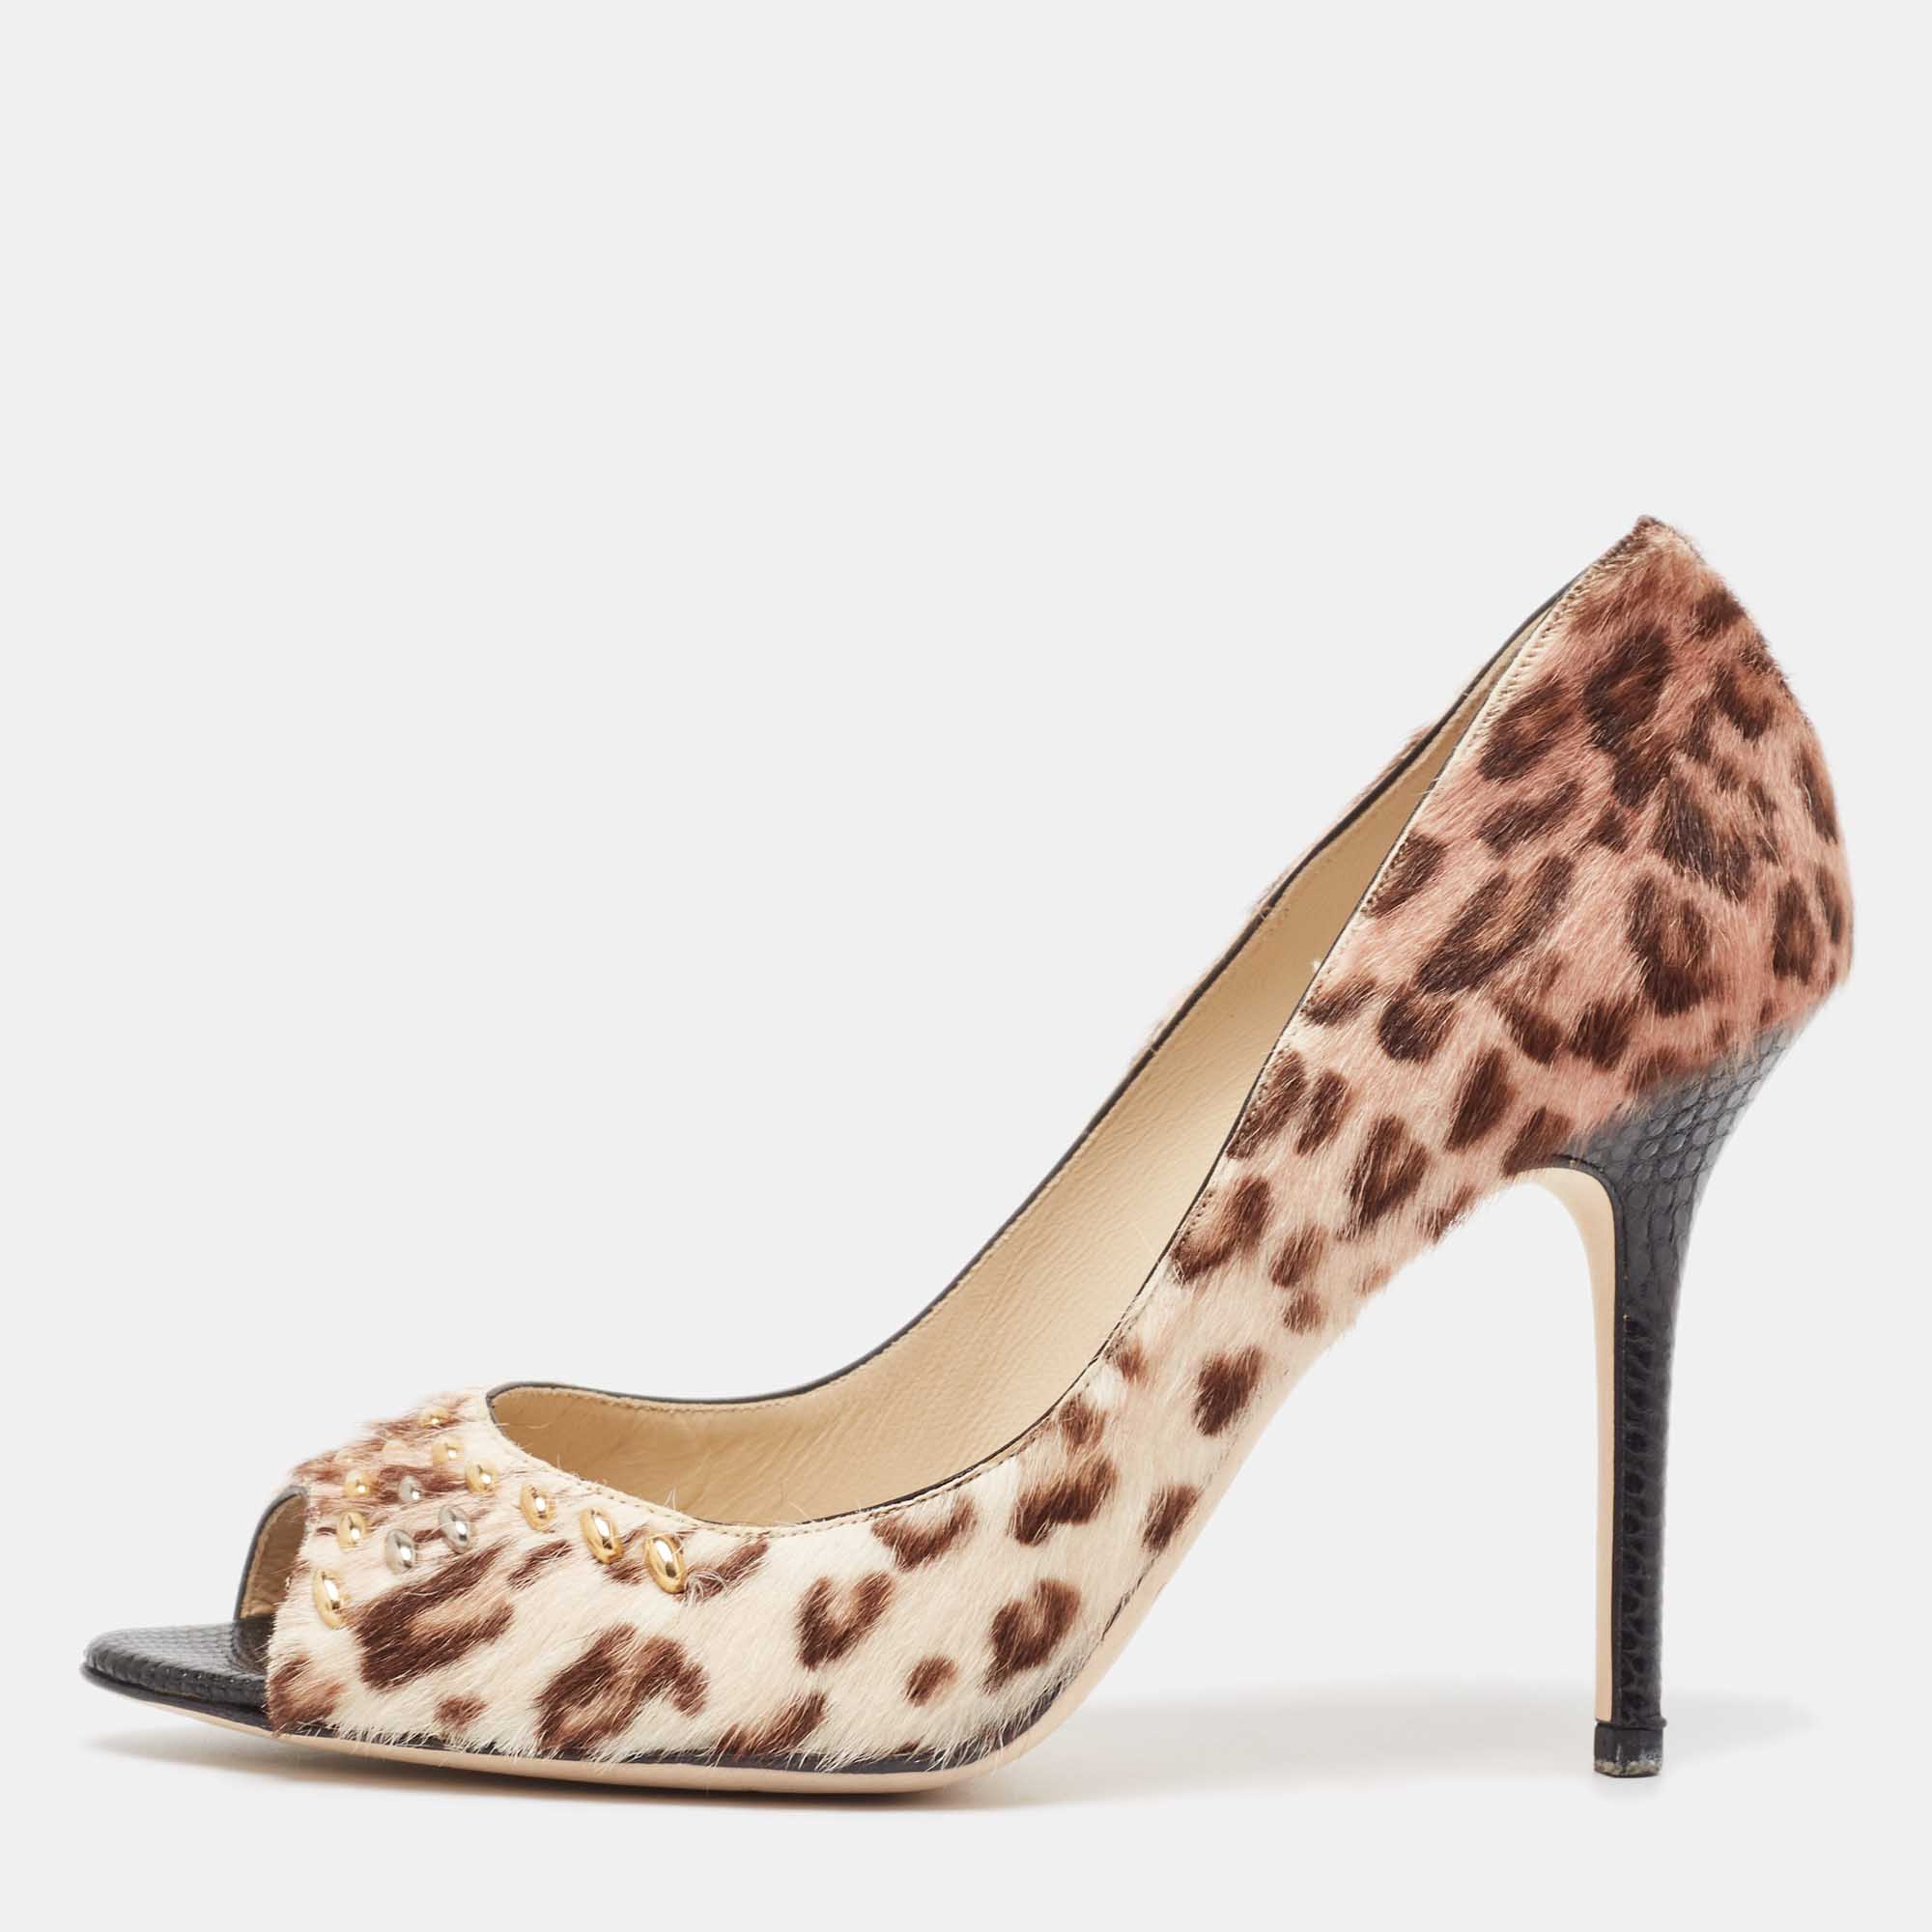 

Jimmy Choo Tricolor Animal Print Calf Hair Studded Open Toe Pumps Size, Brown